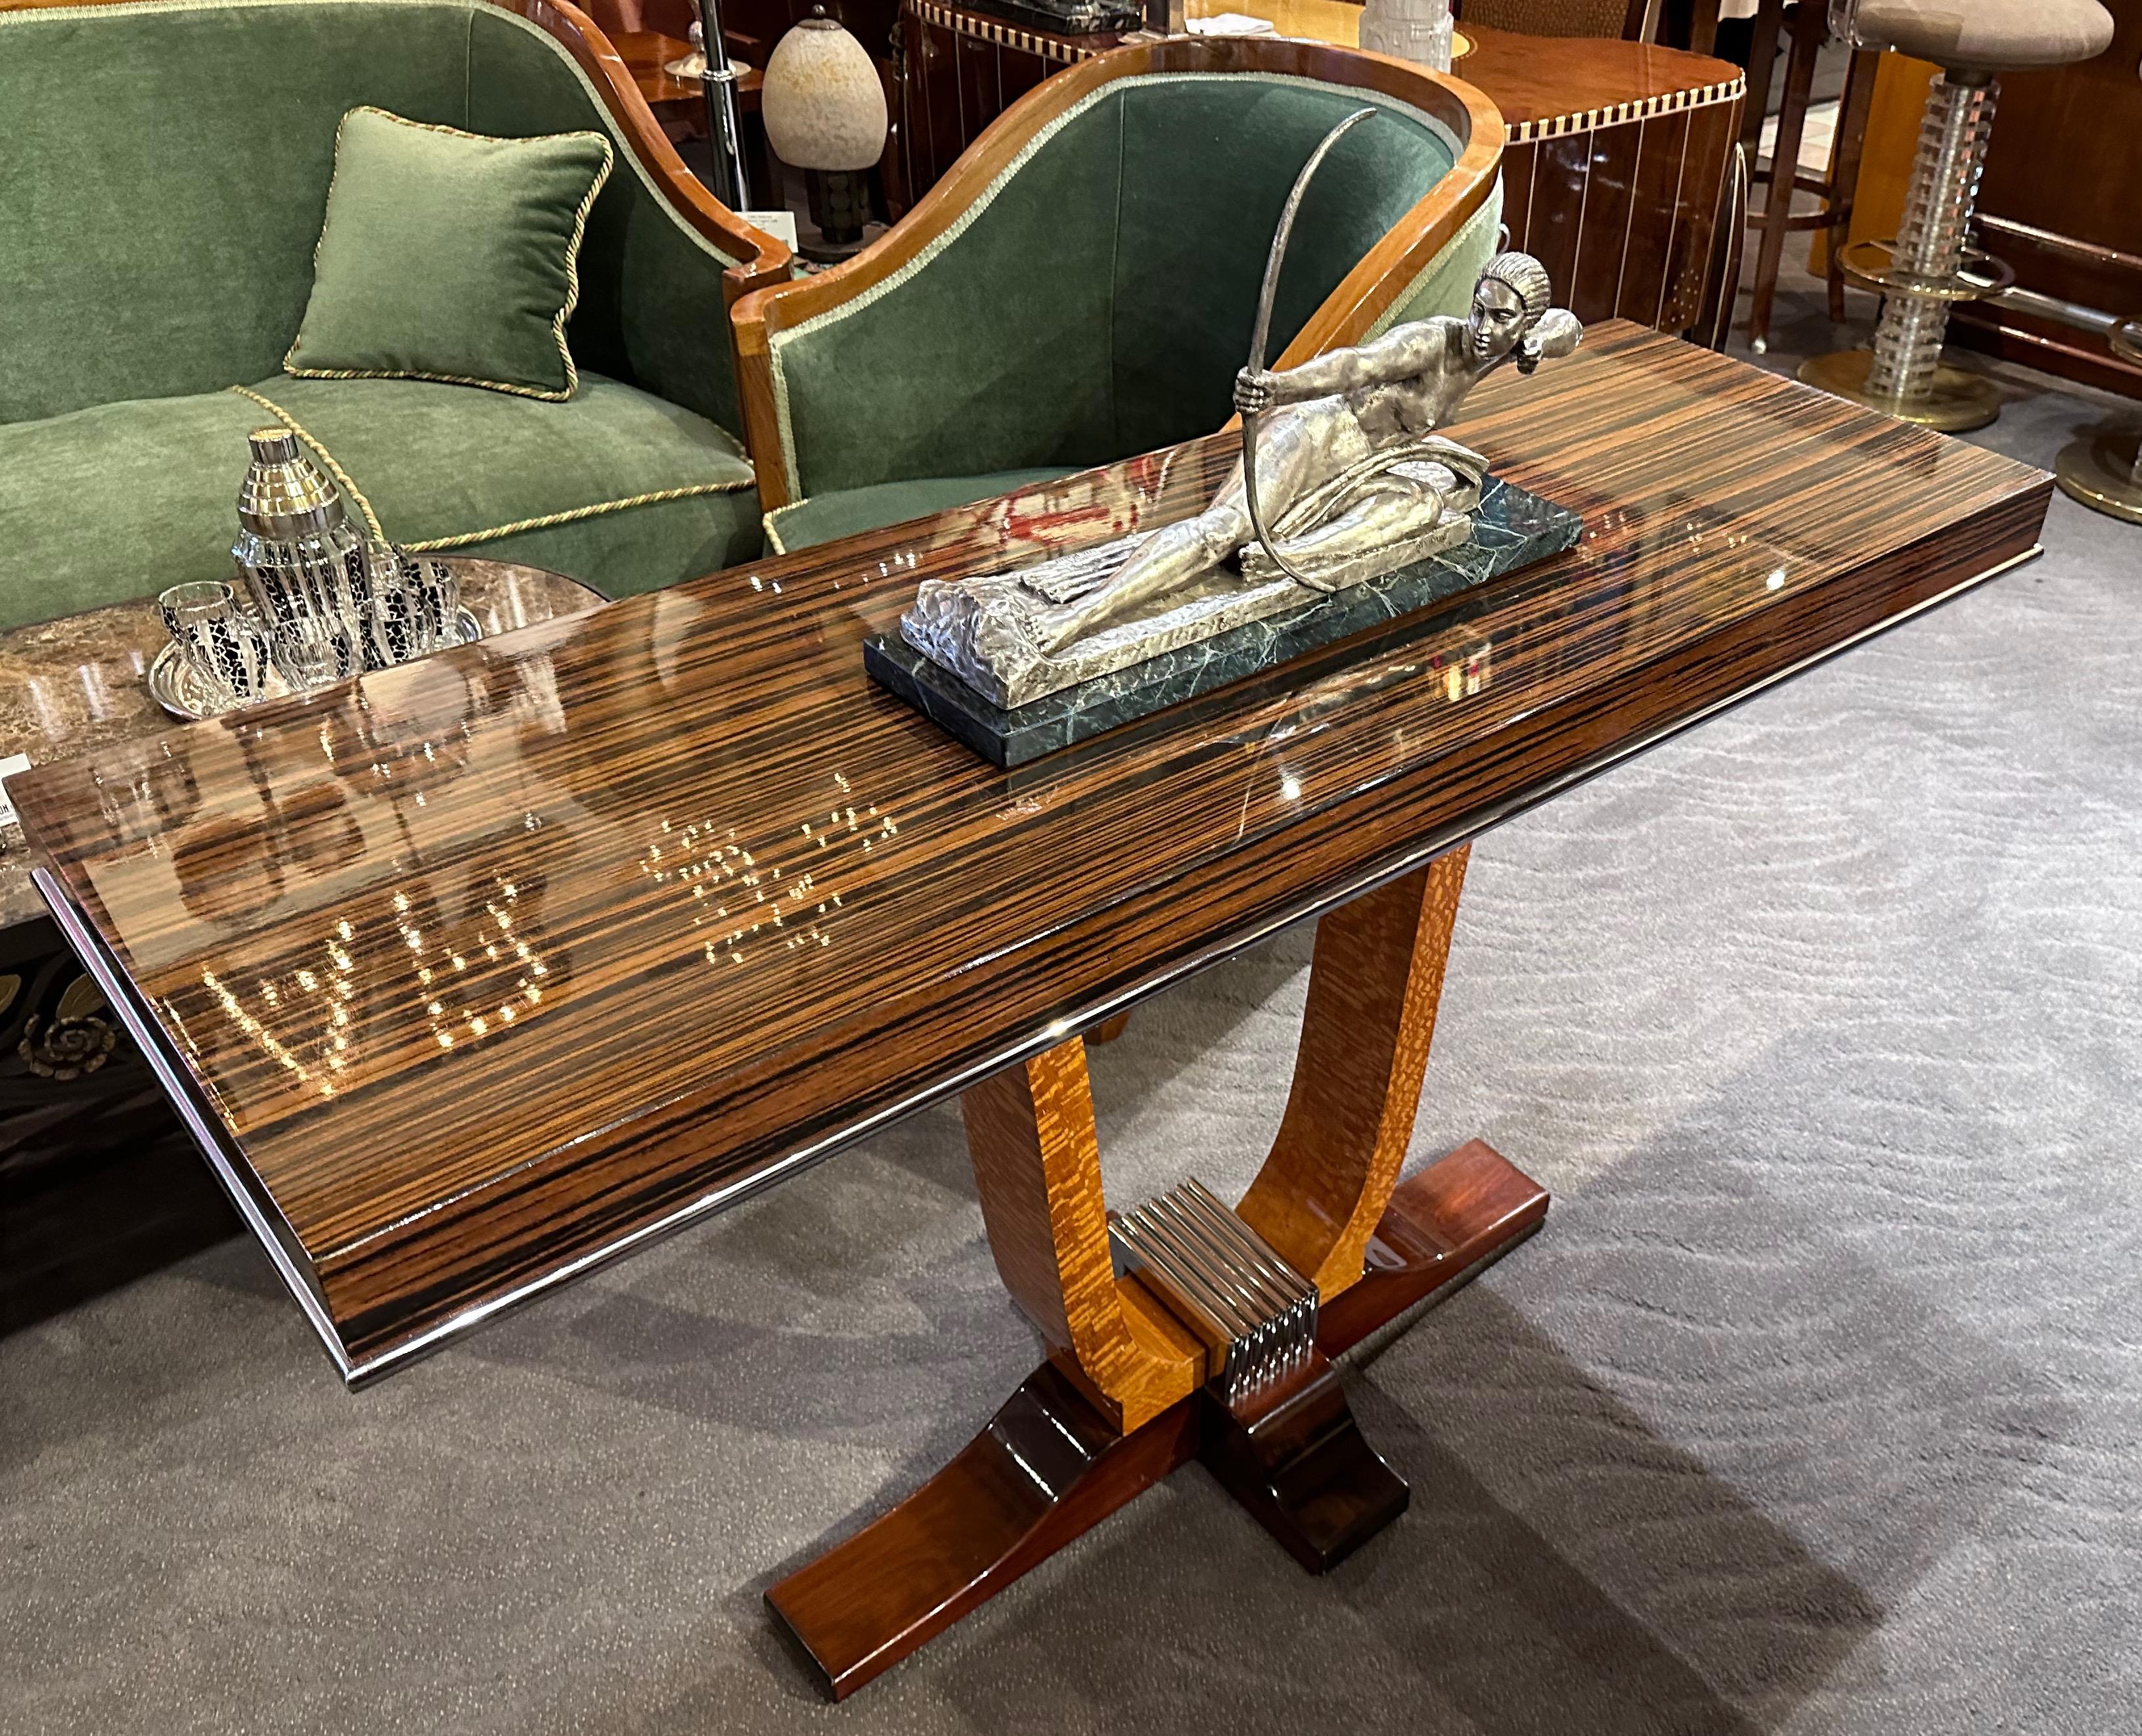 French Style Art Deco Console Macassar & Chrome. This elegant console was made in Argentina and is crafted in Macassar, satinwood, and black lacquered wood. The piece is accented with chrome detailing along the table edge and at the base. This